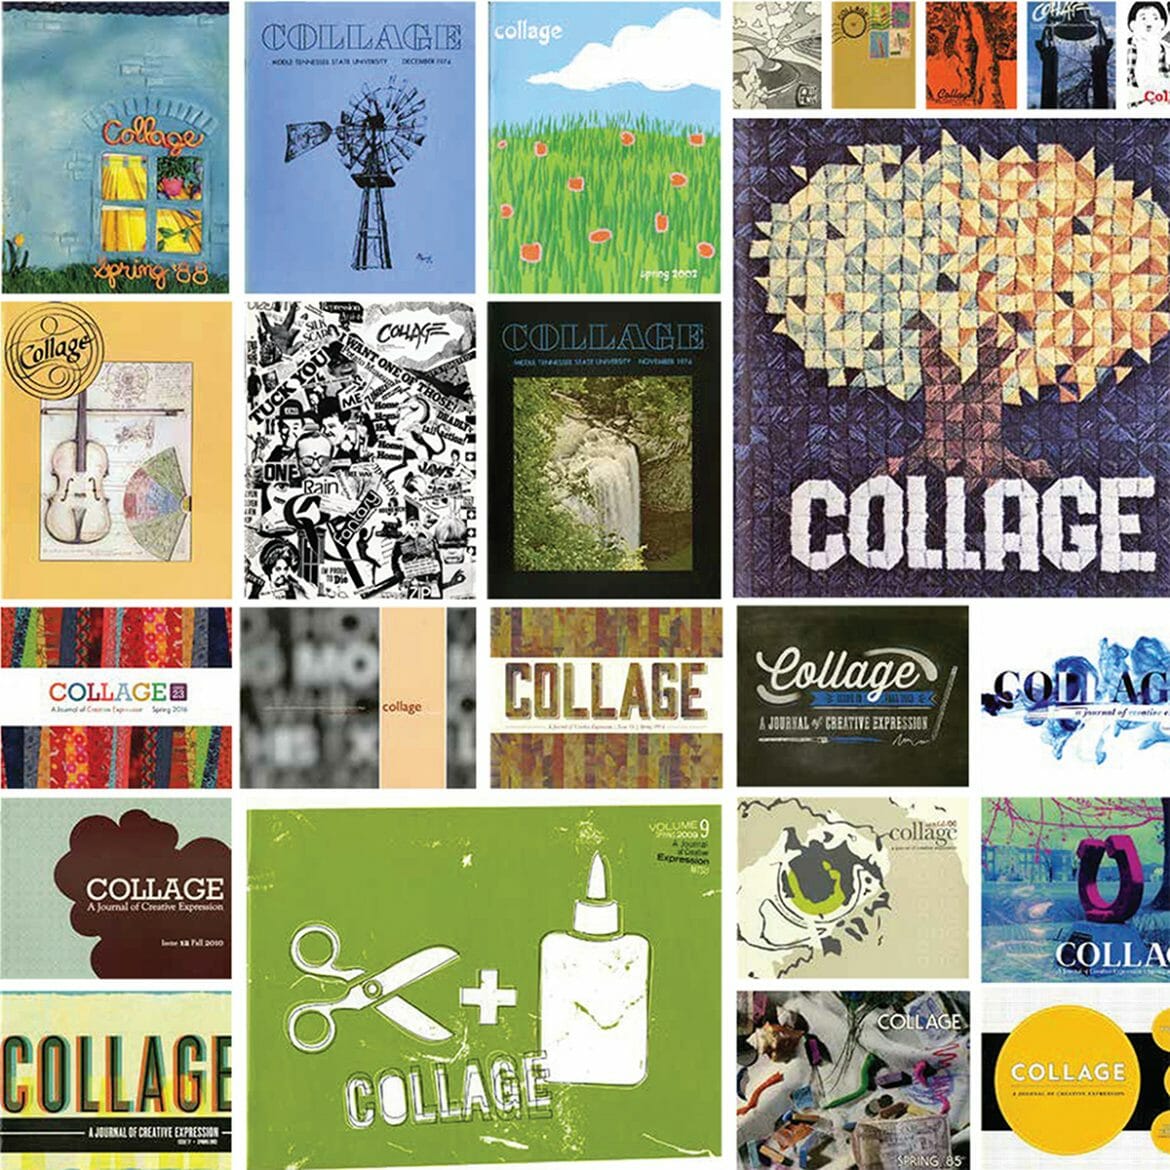 Free Magazines for Making Collage - Minette Riordan, Ph.D.